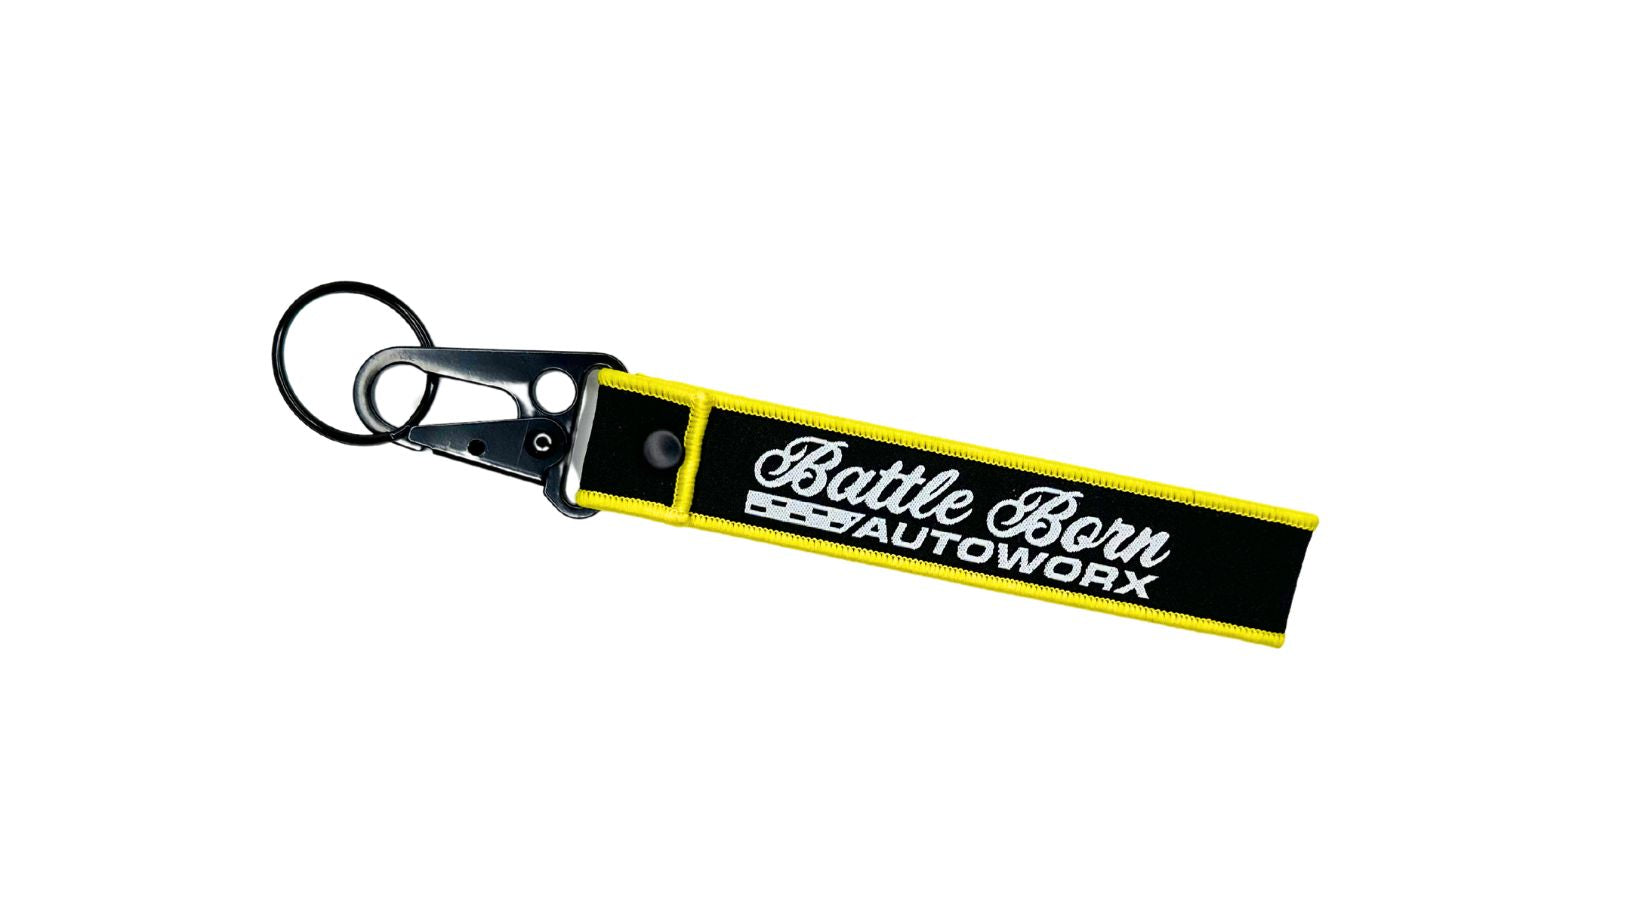 REMOVE BEFORE BATTLE KEYCHAIN